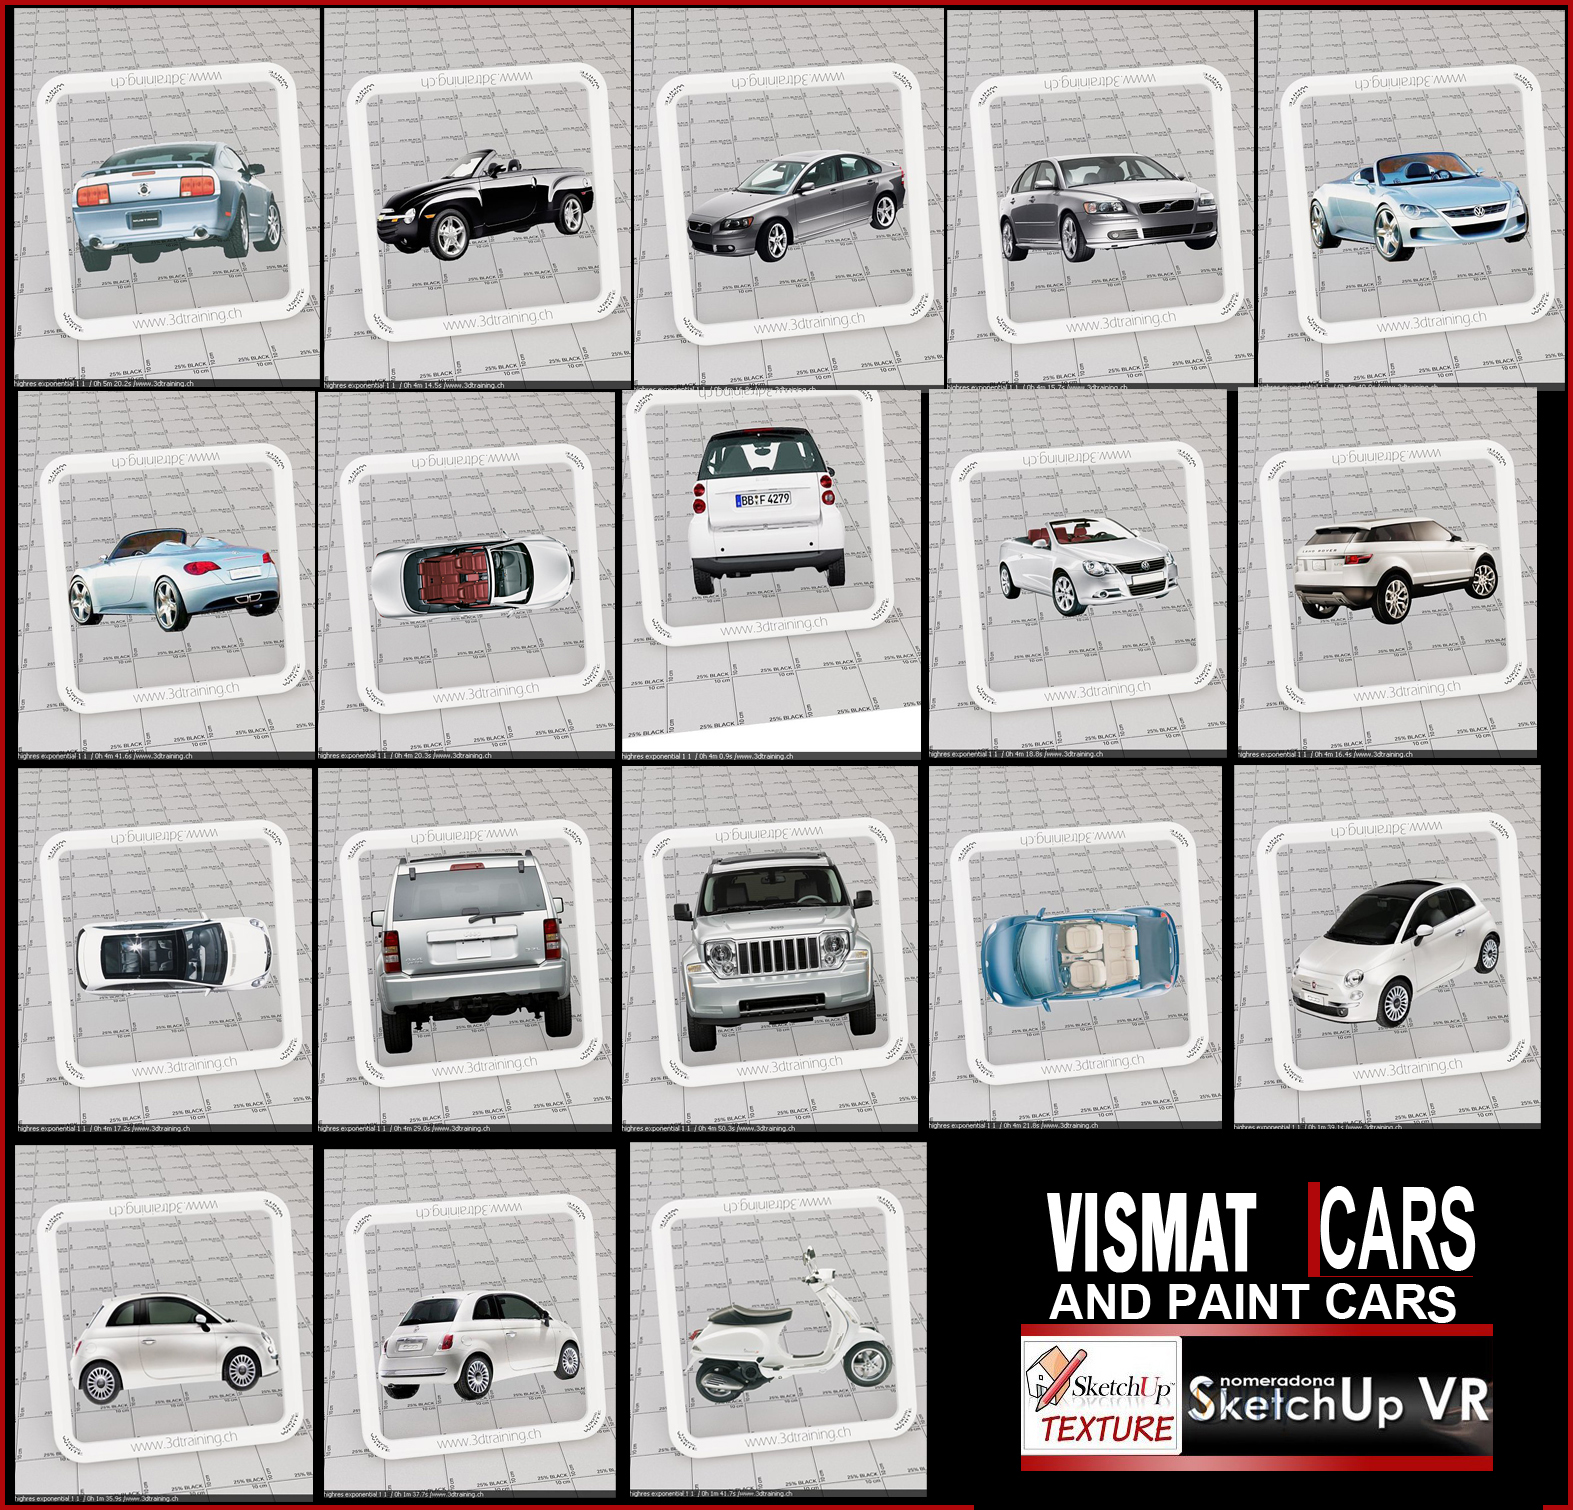 to enrich your collection of material vismat